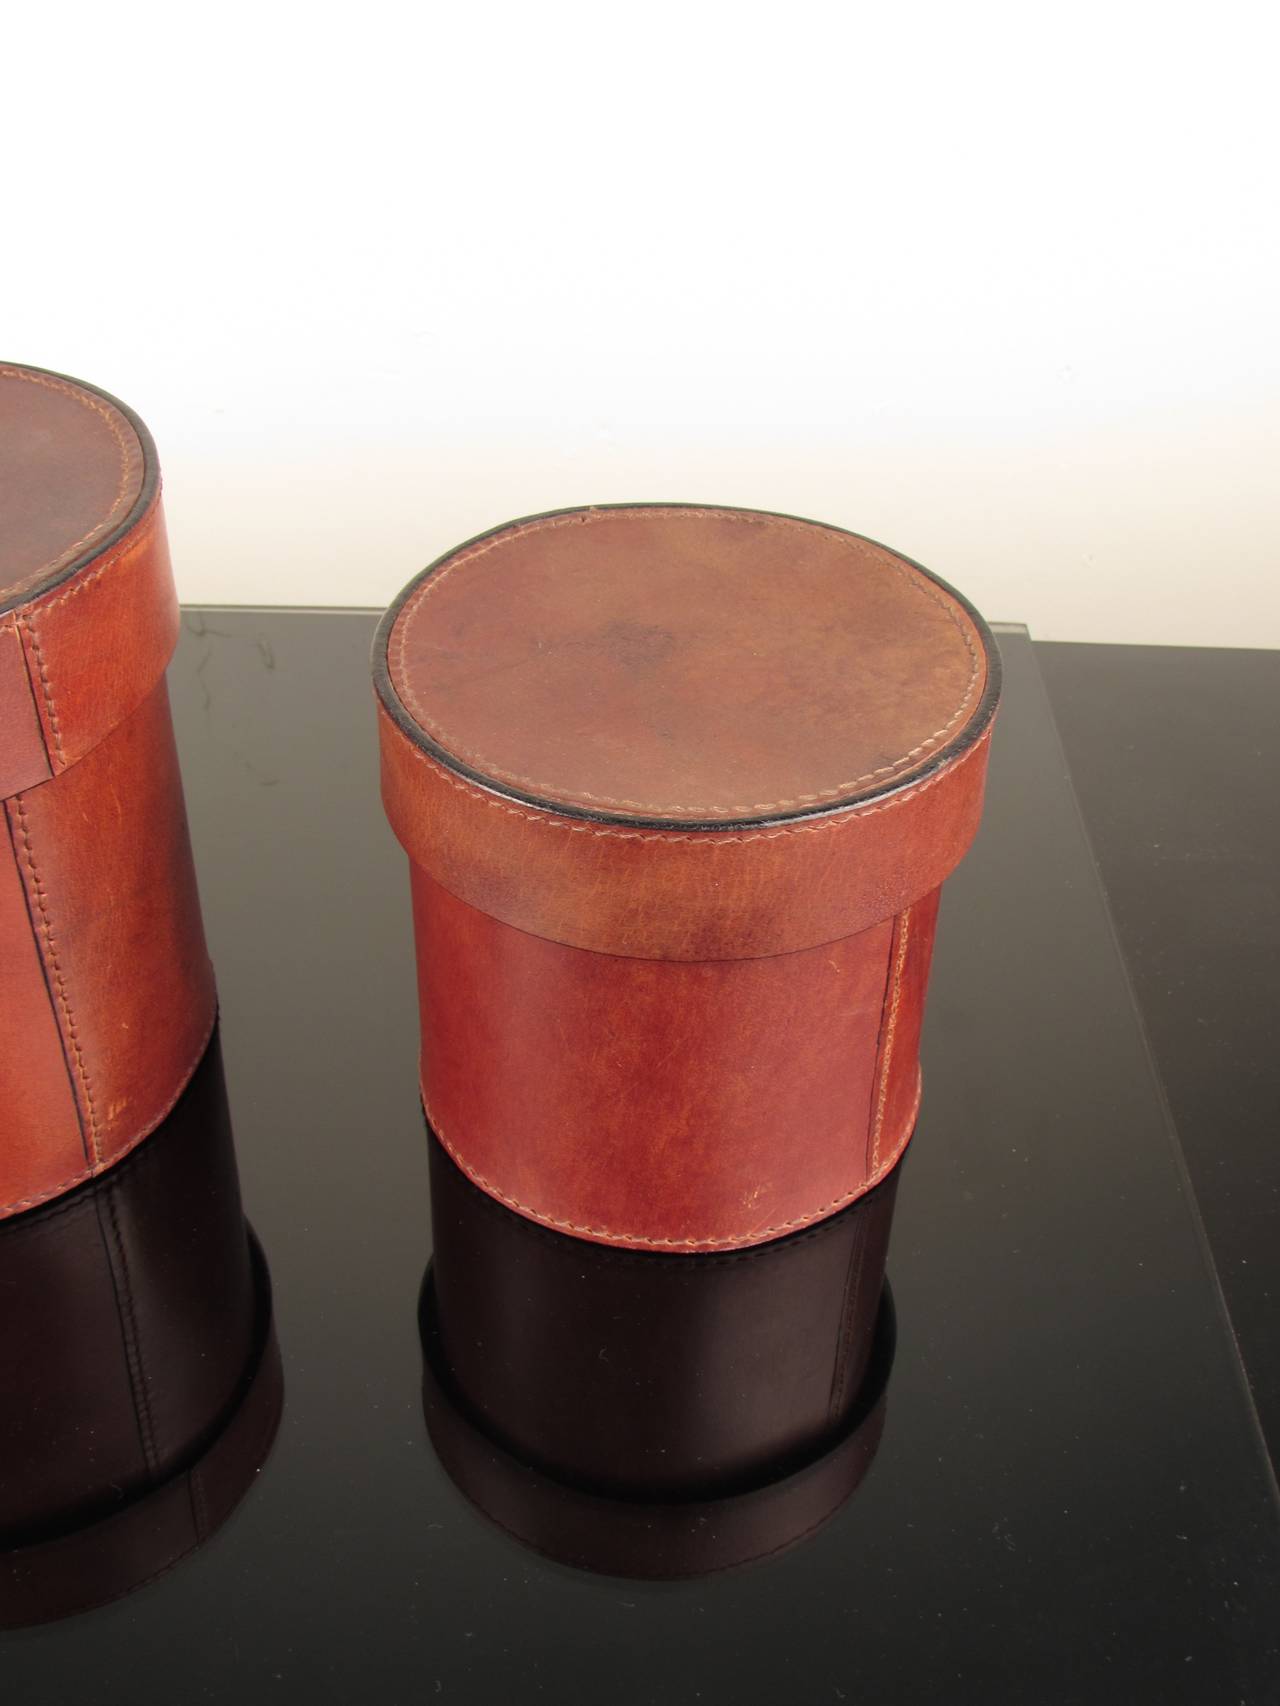 Late 20th Century Handsome Trio of Buttery Leather Lidded Vessels